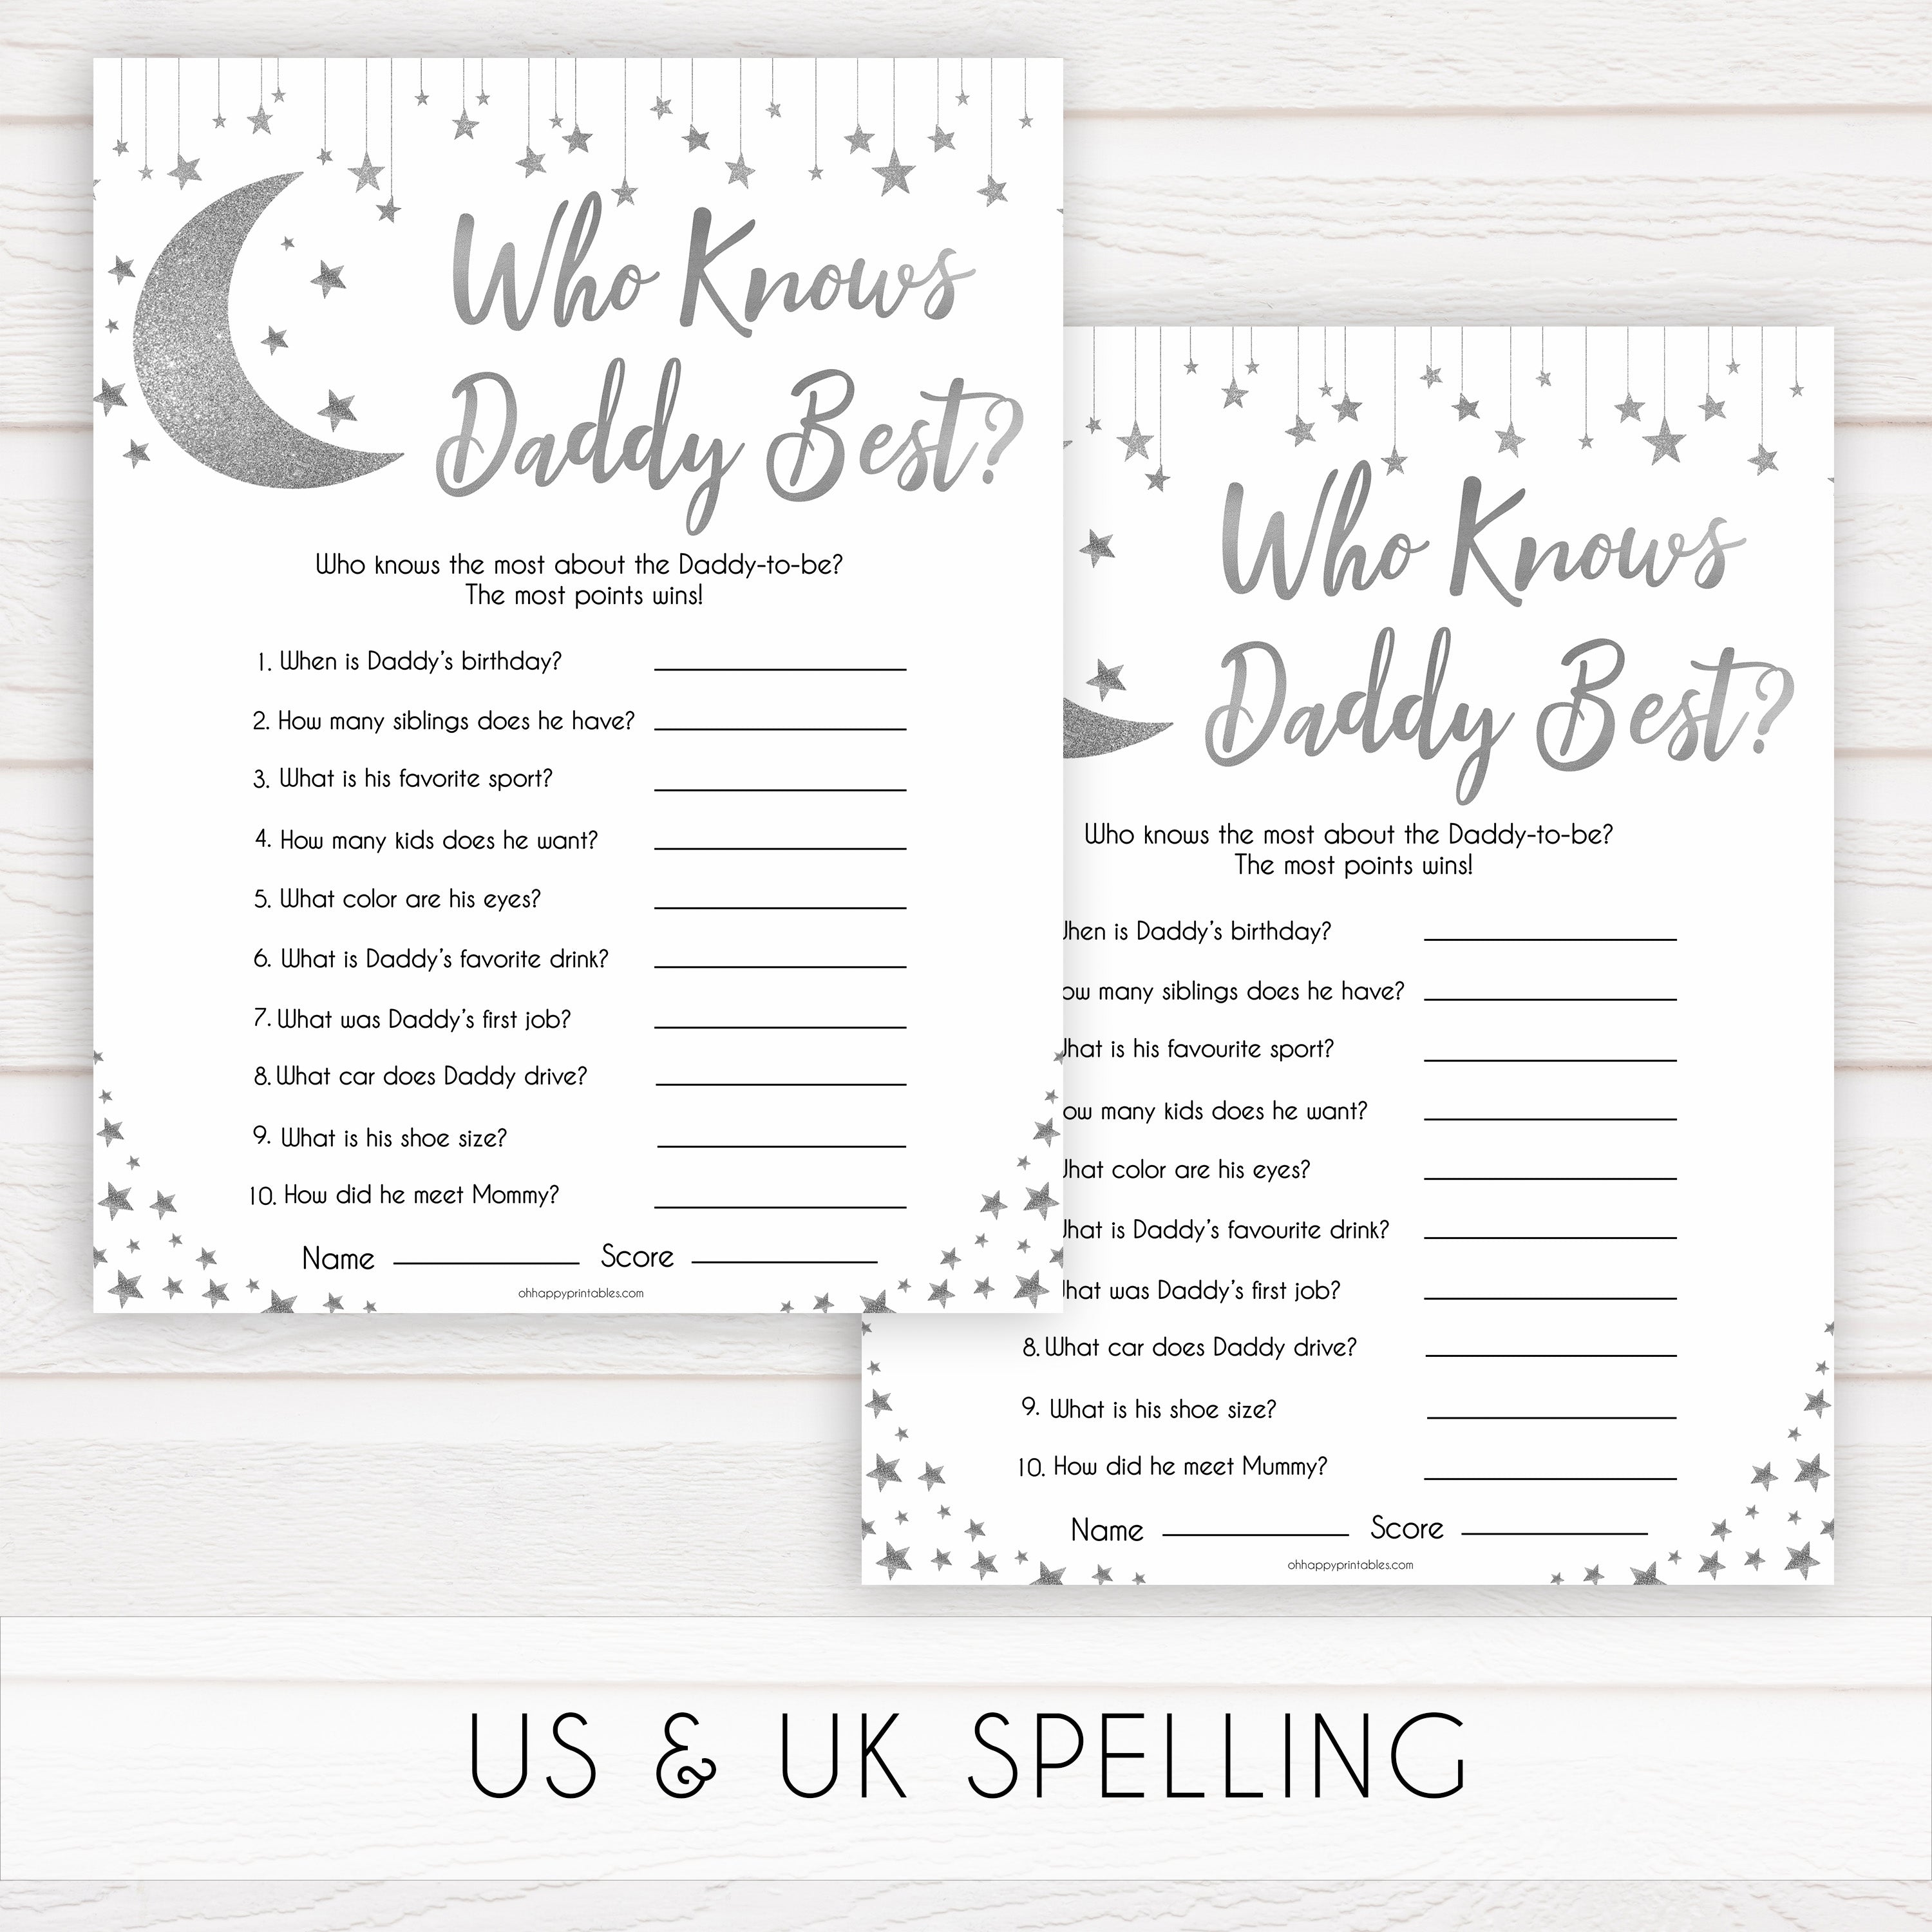 Silver little star, who knows daddy best baby games, baby shower games, printable baby games, fun baby games, twinkle little star games, baby games, fun baby shower ideas, baby shower ideas